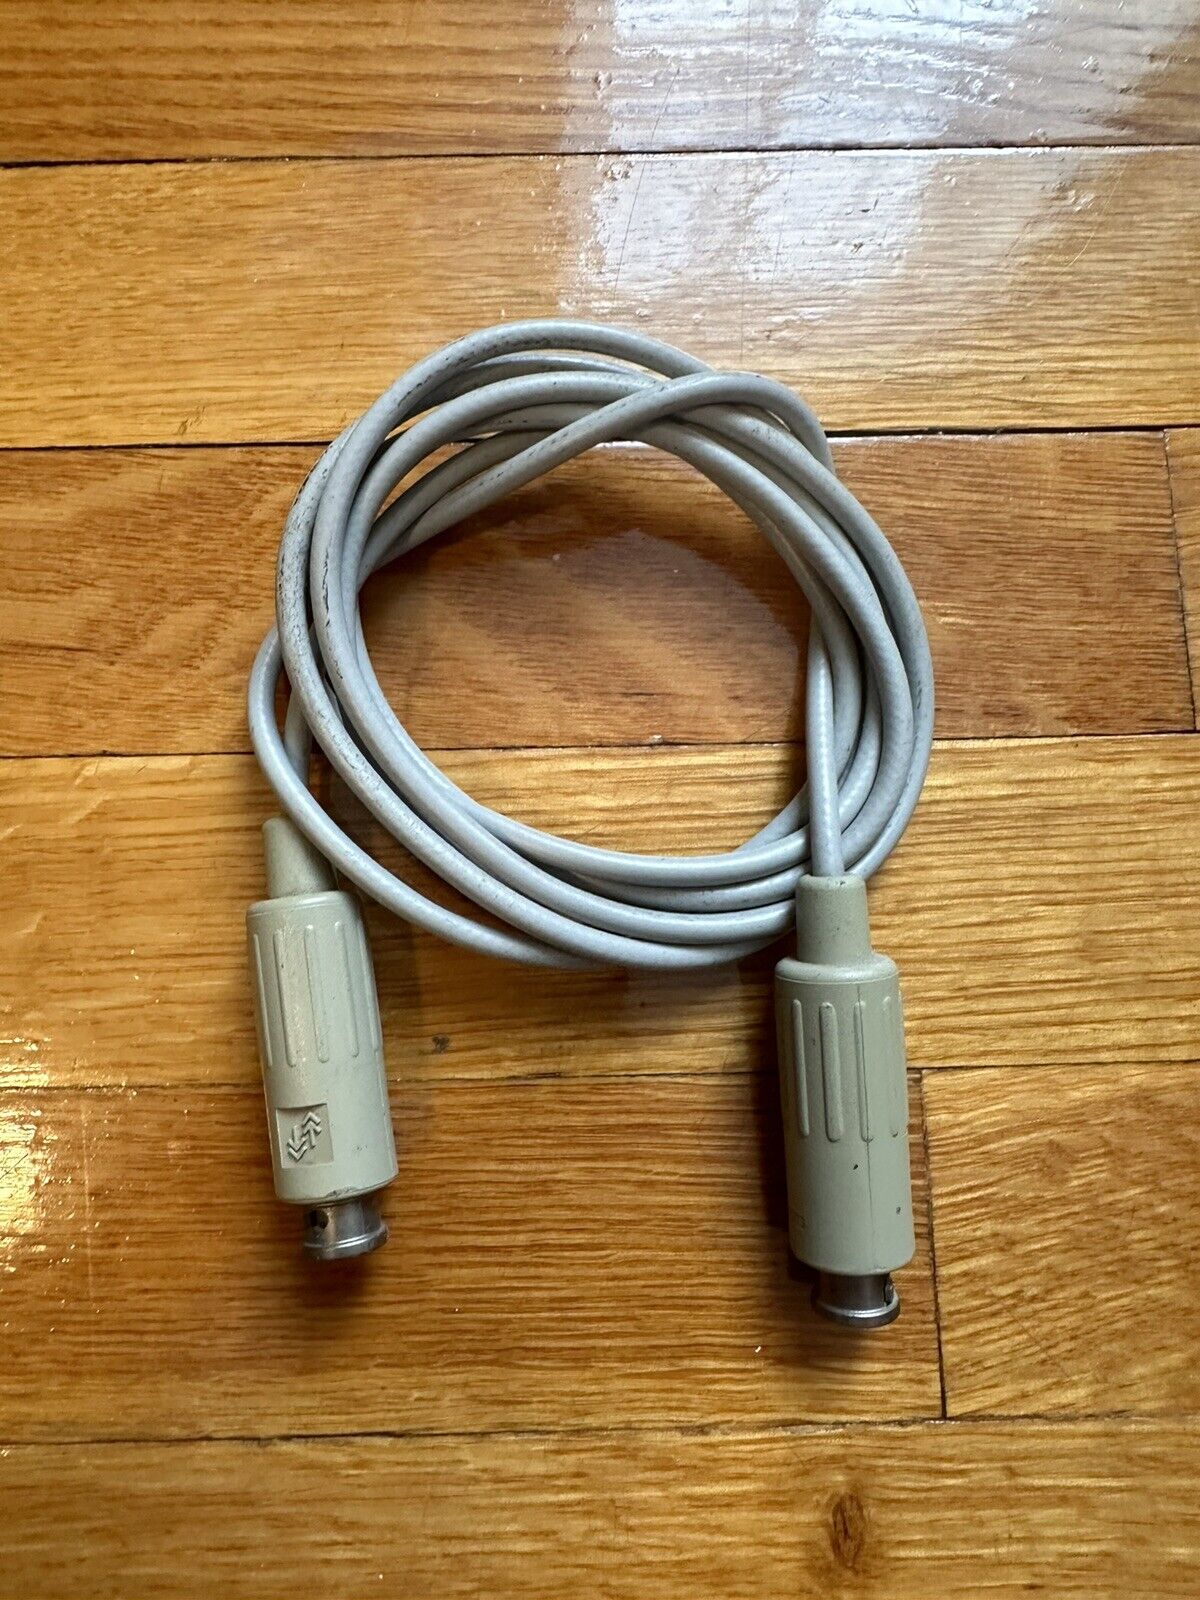 Apple coax cable for 10BASE2 ethernet or thinnet networking 590-0540-A Rare